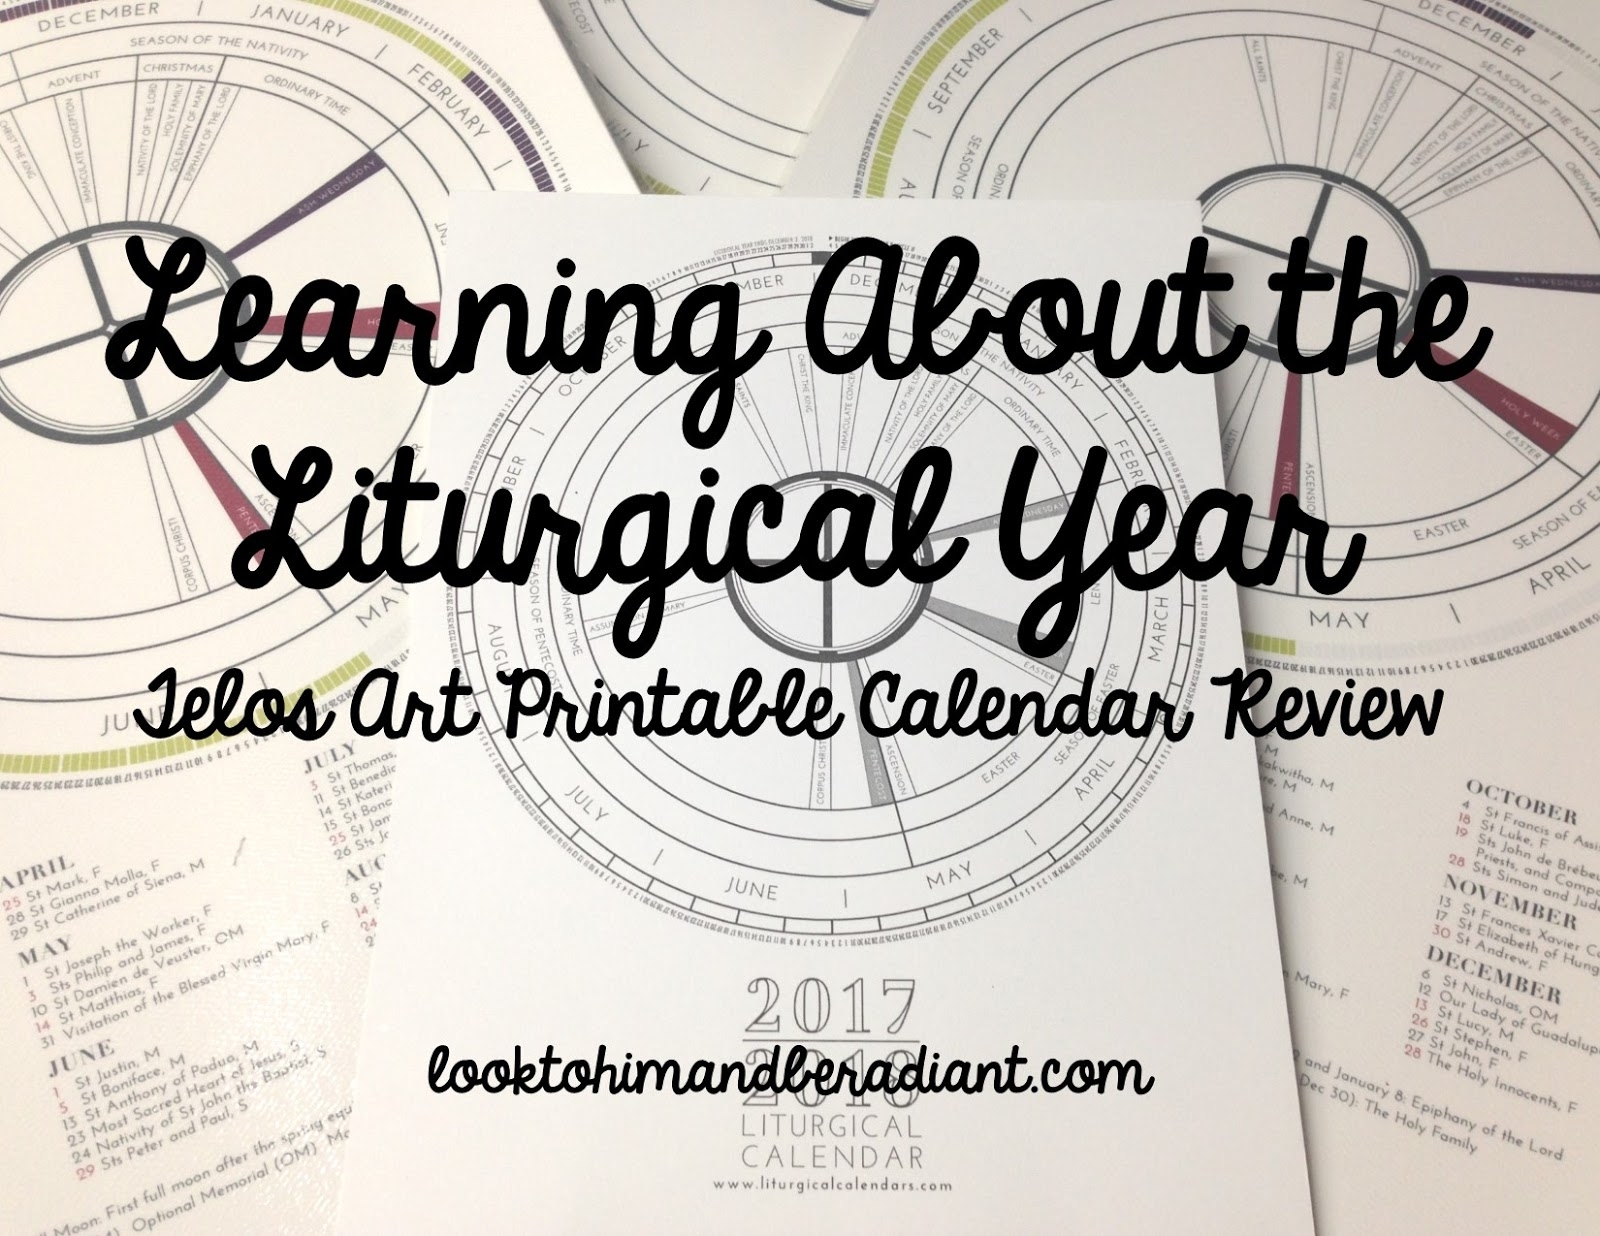 Take Lessons About The Liturgical Calendar